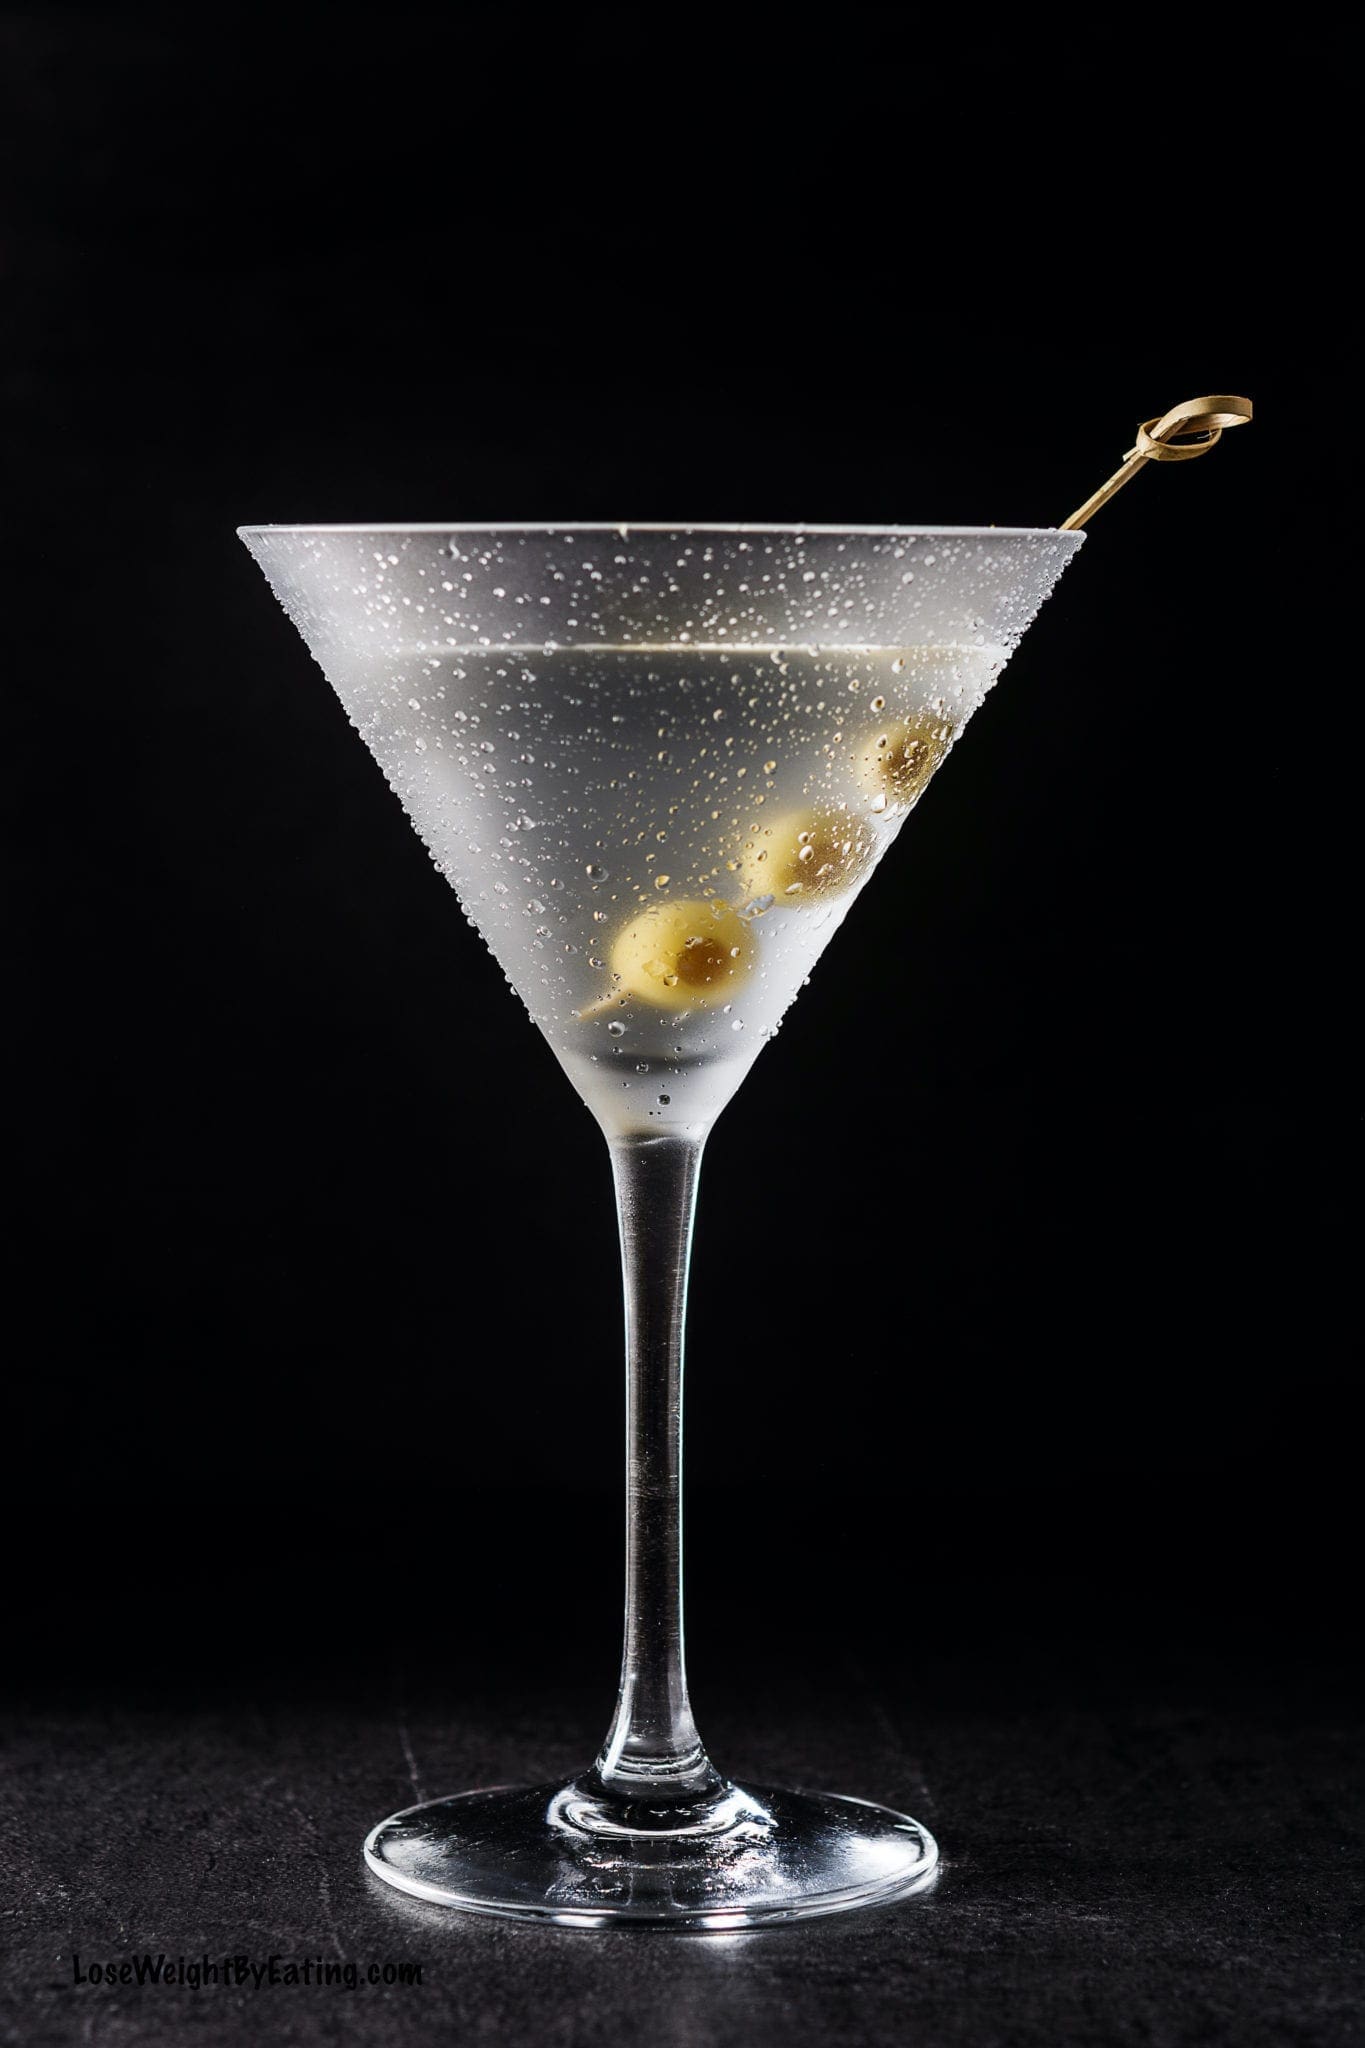 Low Calorie Dirty Martini - Lose Weight By Eating